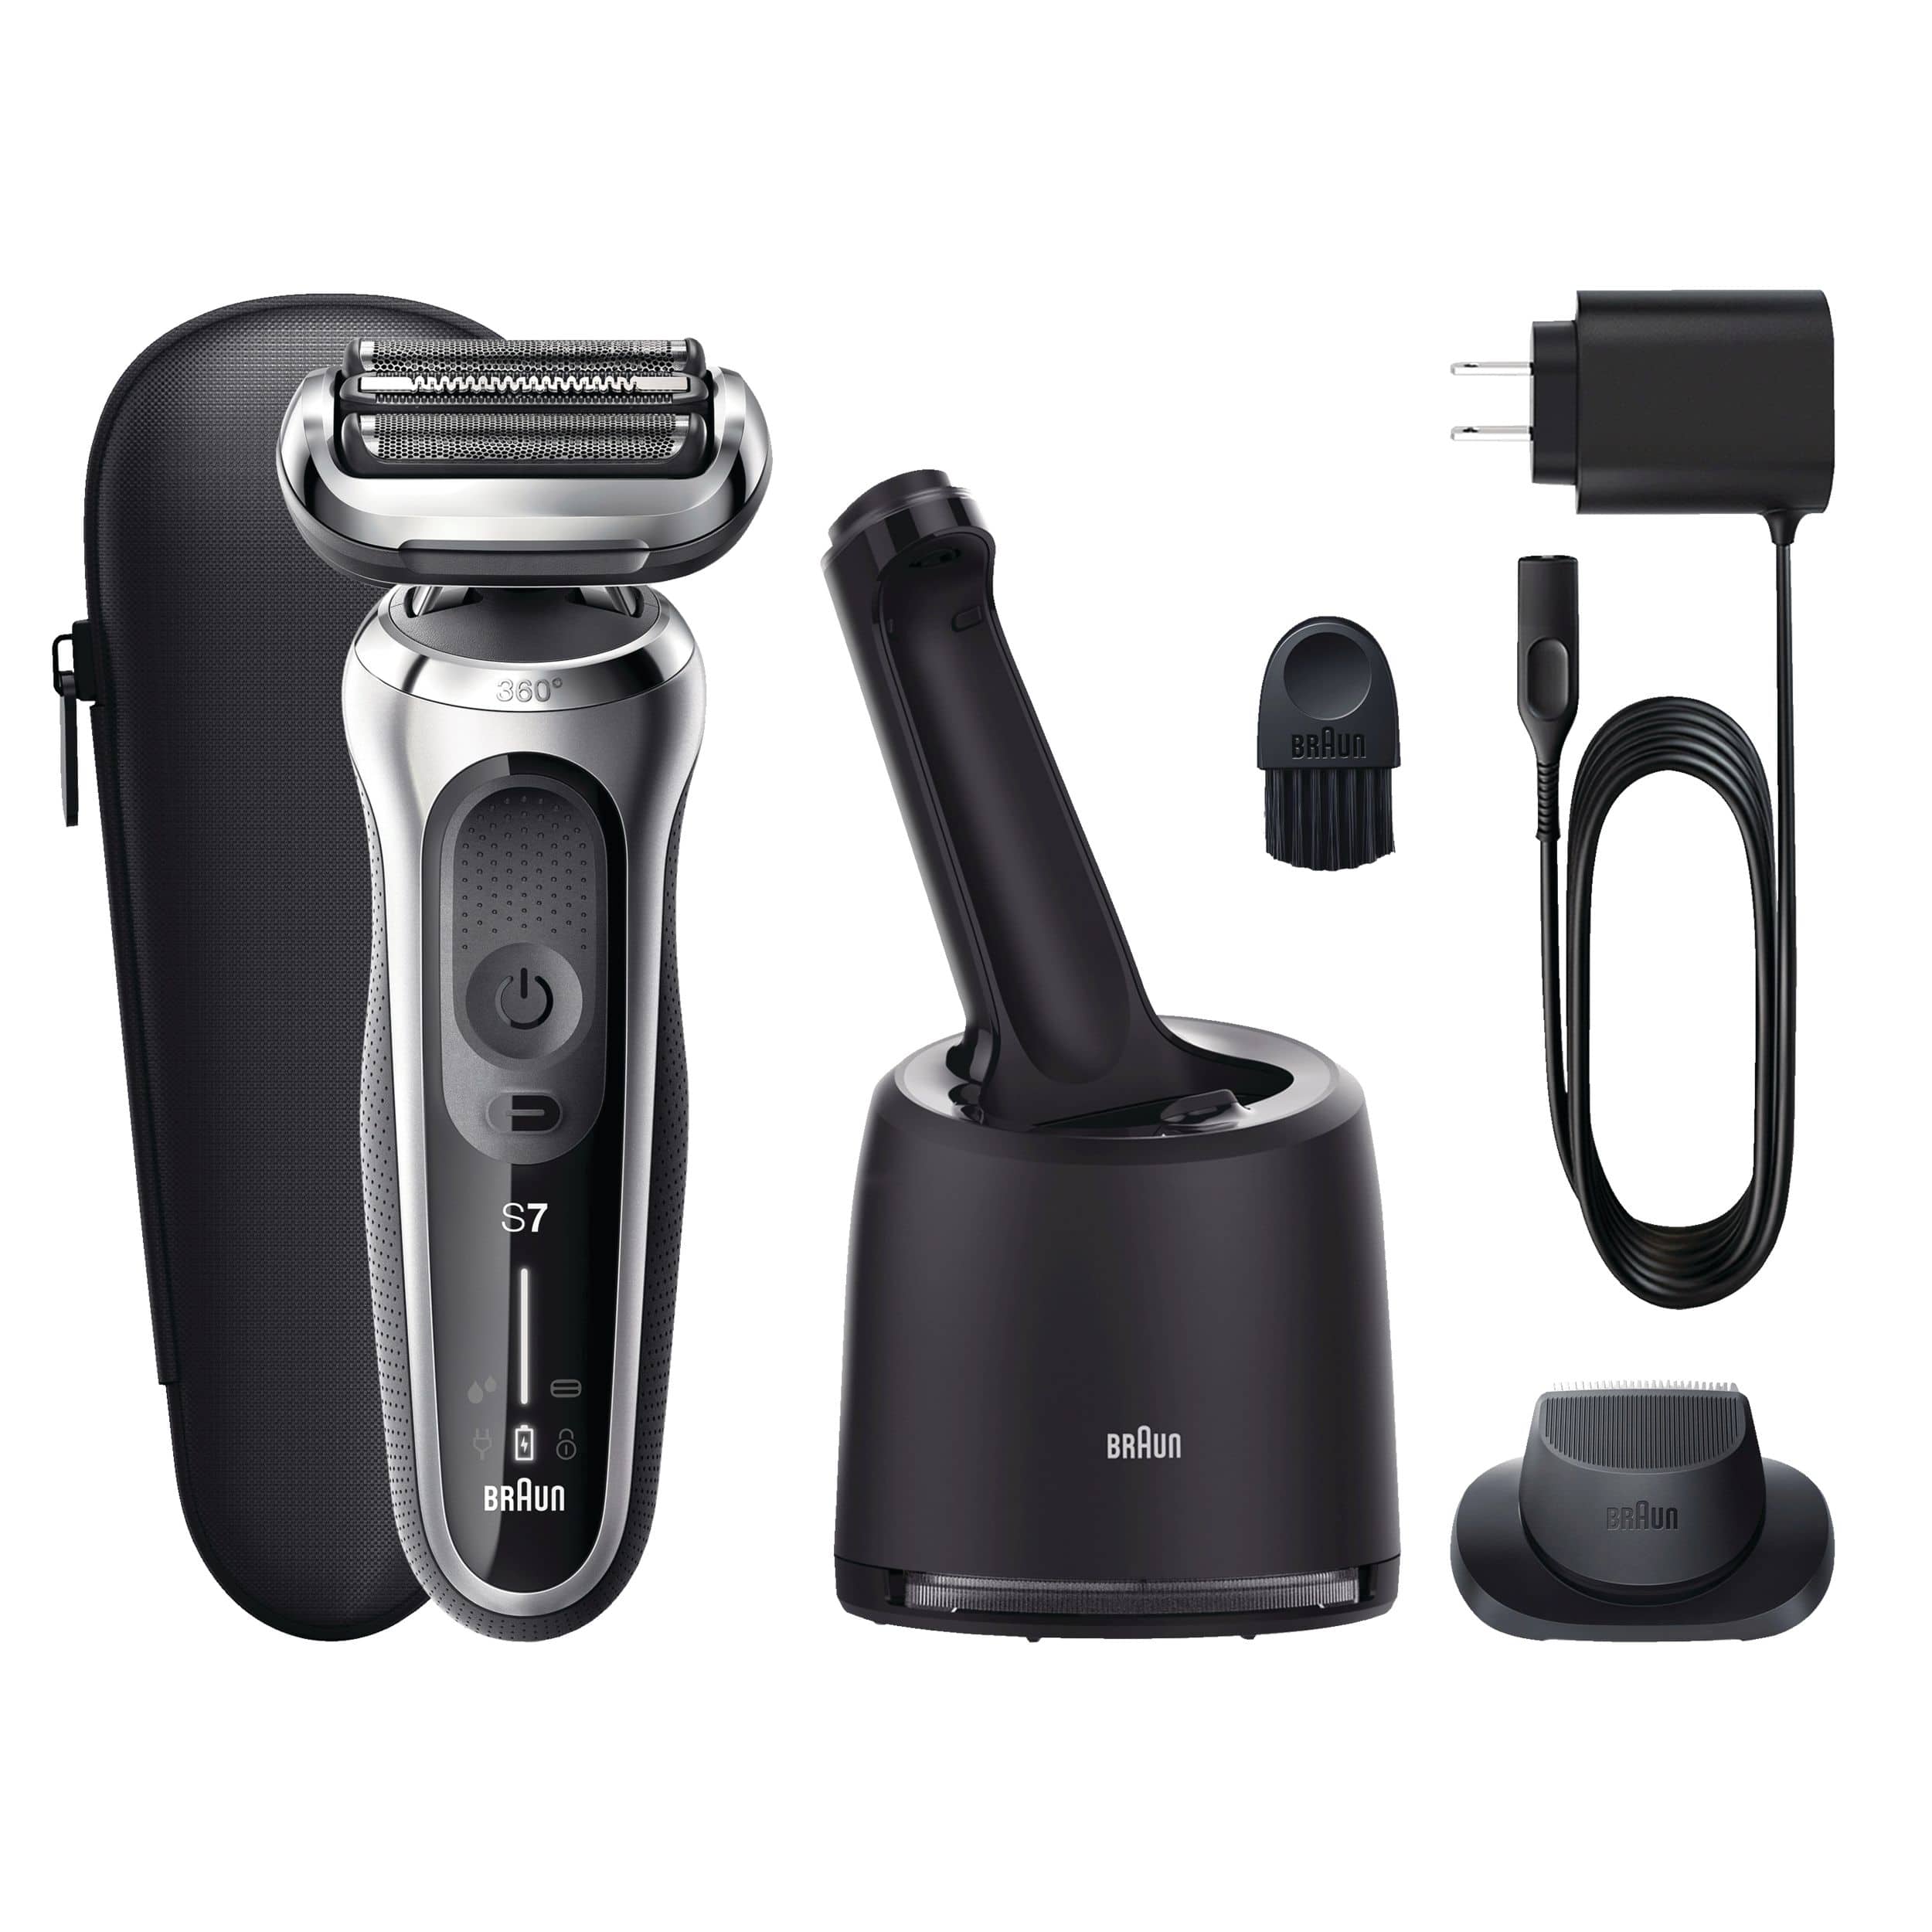 https://media-www.canadiantire.ca/product/living/personal-garment-care/personal-care/0438827/braun-s7-7071cc-foil-shaver-b46d1902-0d6e-4829-b05c-4ce30a52826b-jpgrendition.jpg